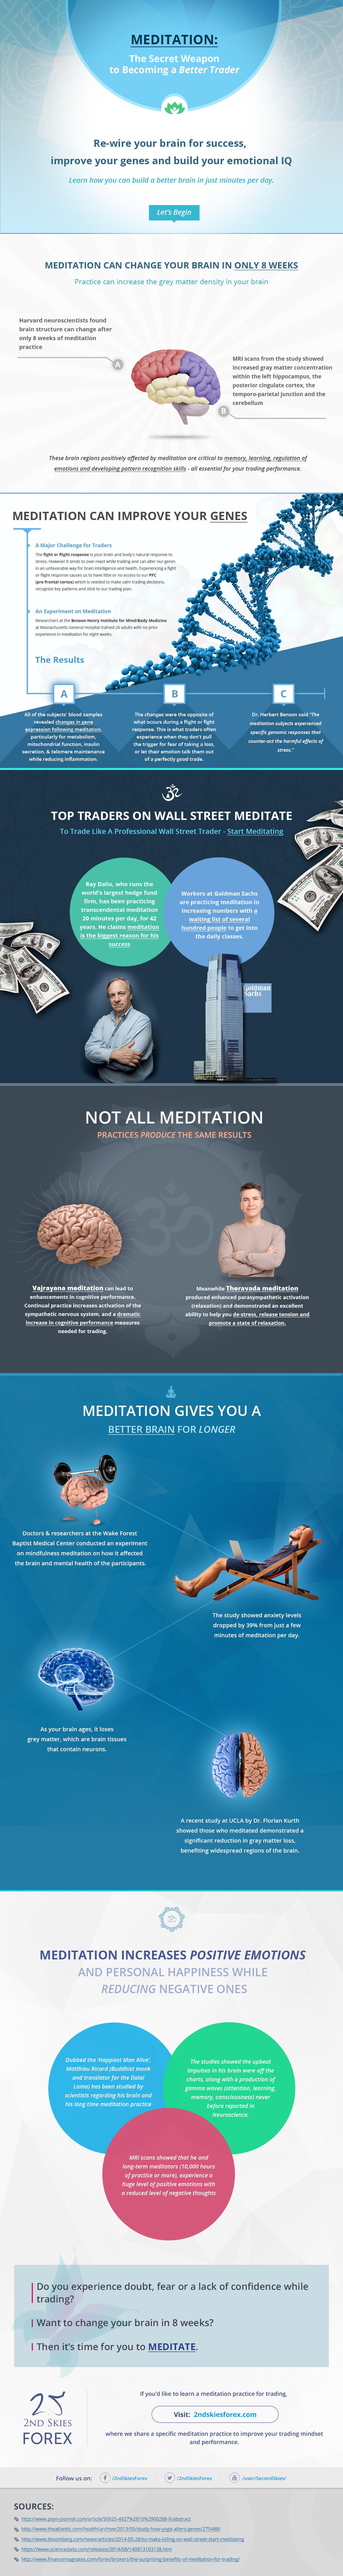 Meditation - The Secret Weapon to Becoming a Better Trader